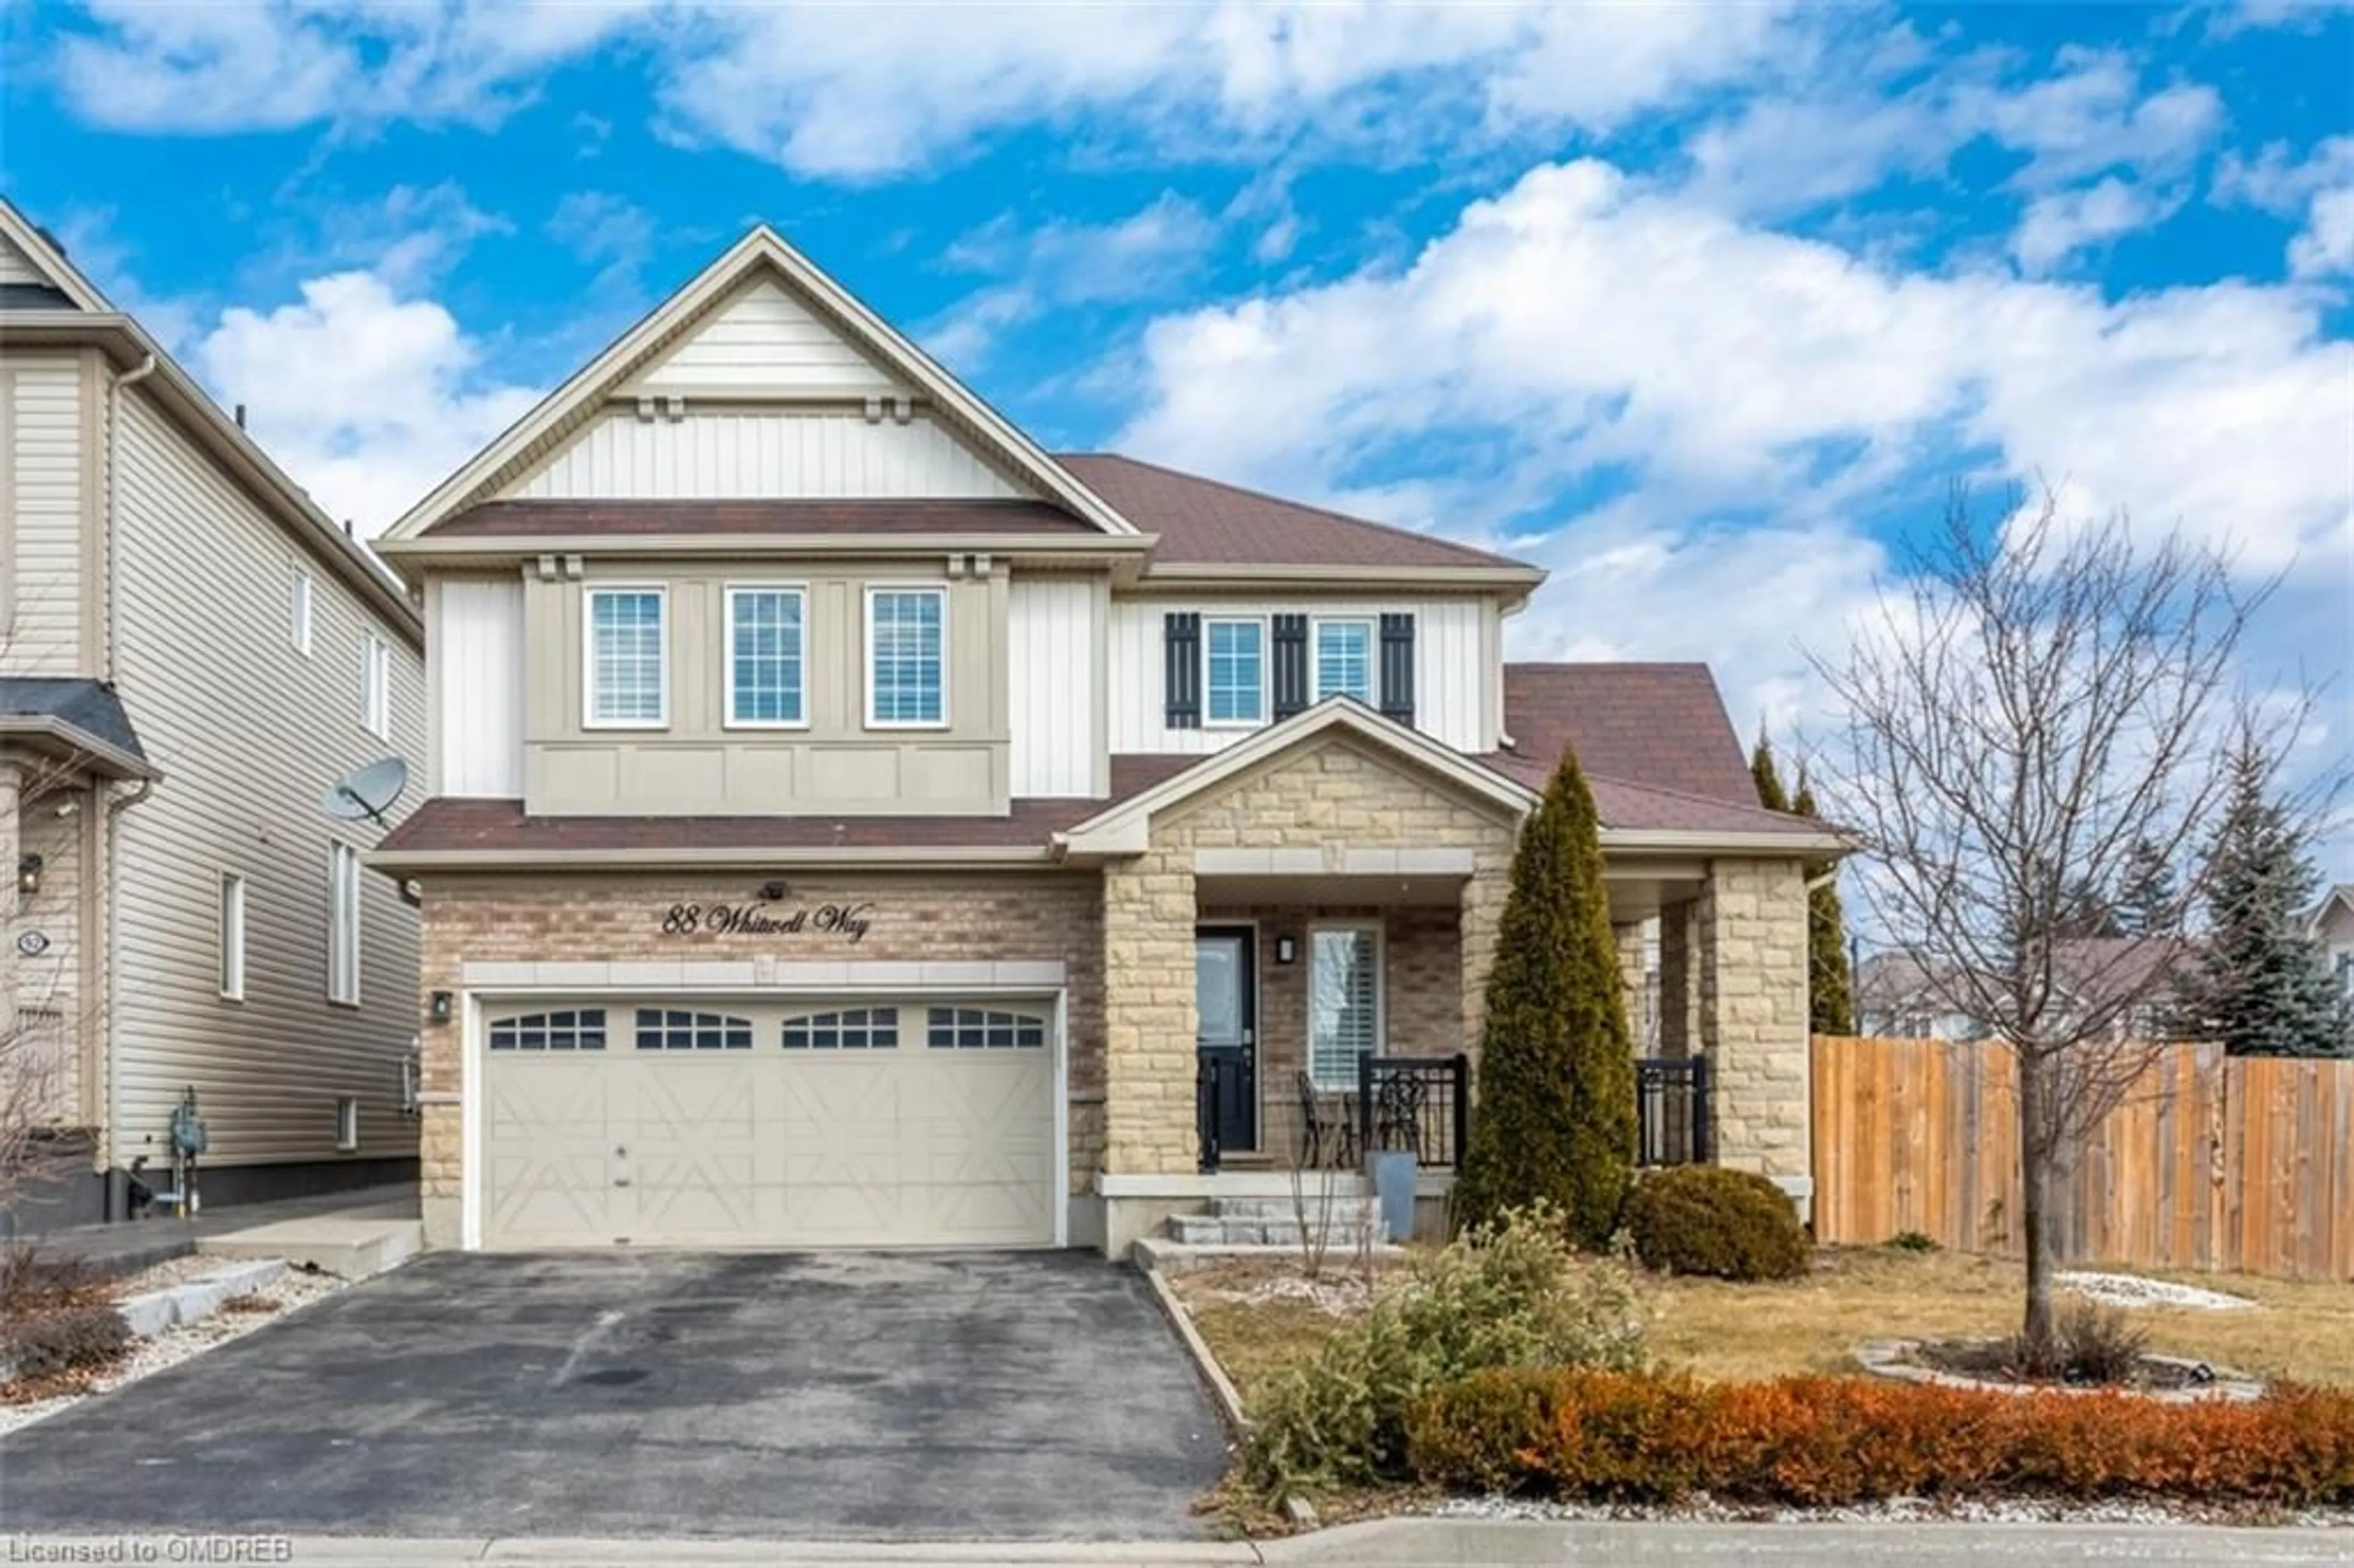 Frontside or backside of a home for 88 Whitwell Way, Binbrook Ontario L0R 1C0